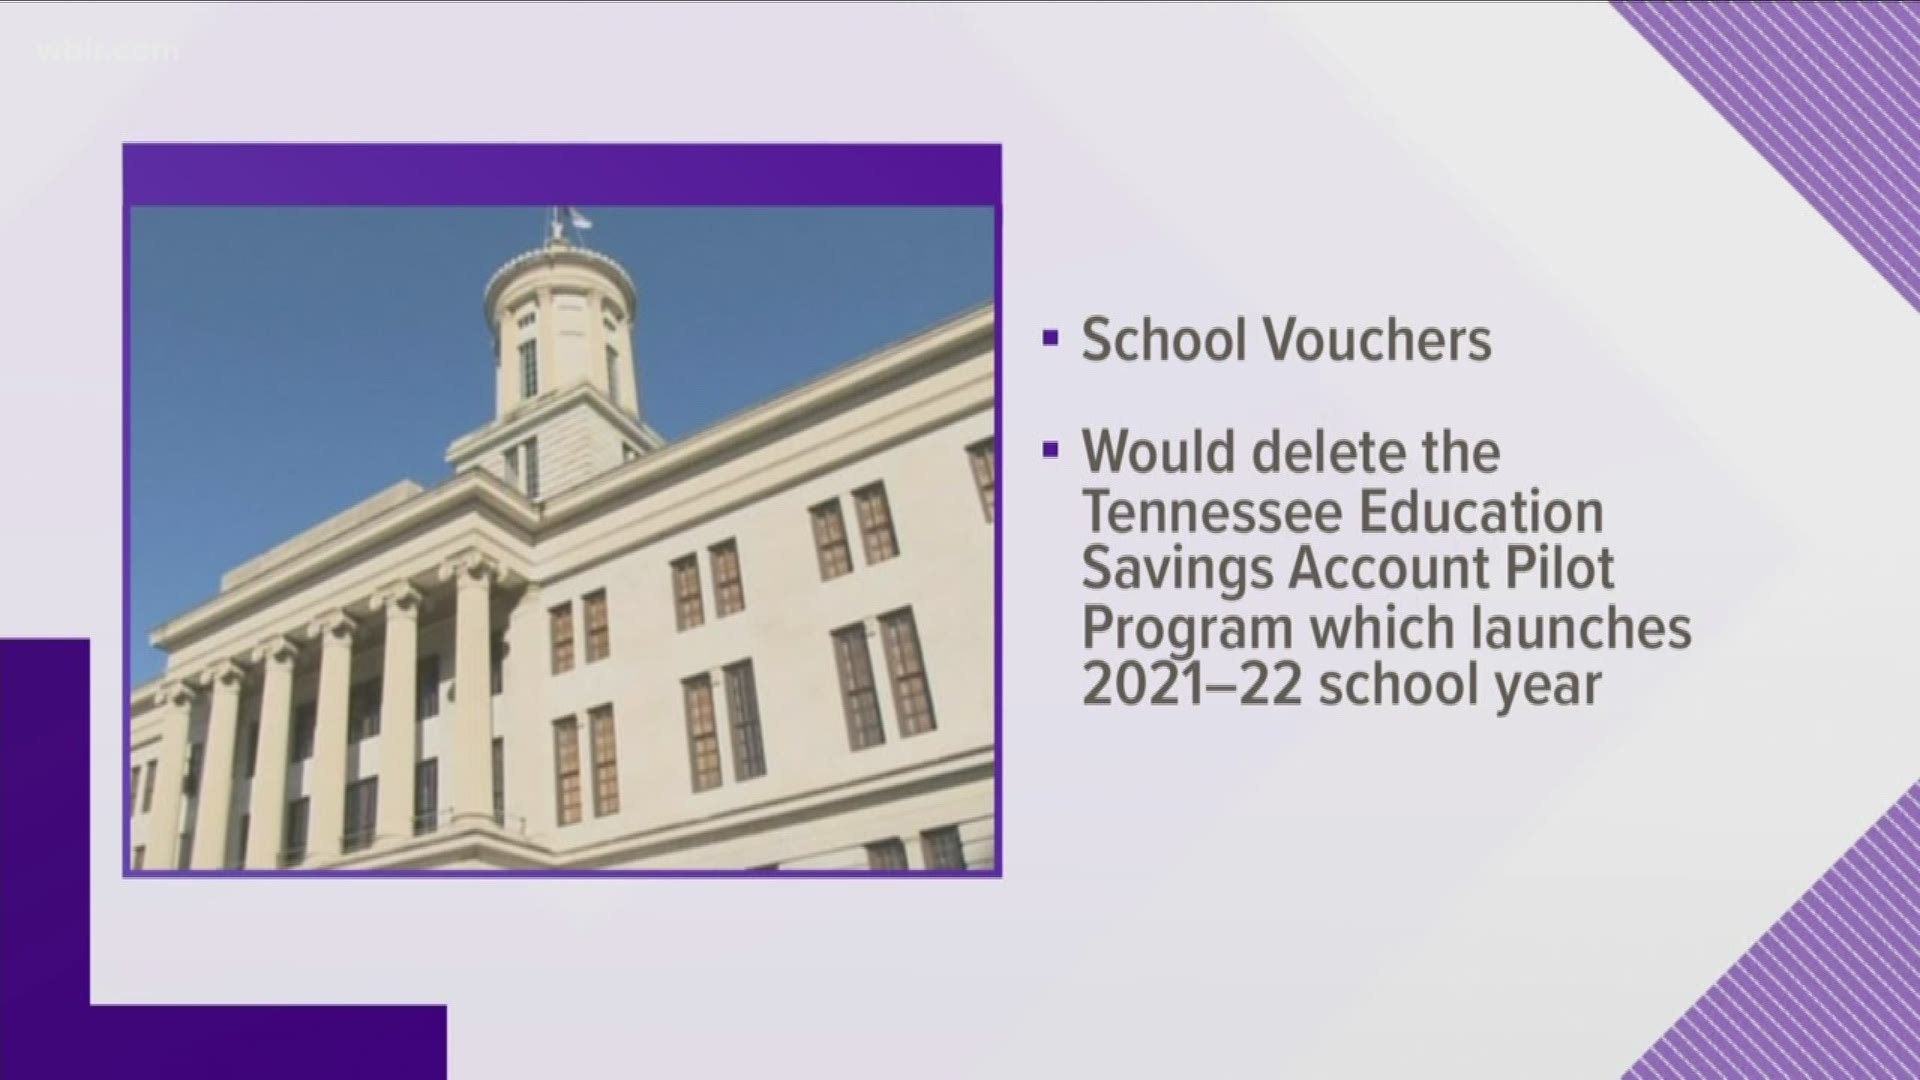 A bill is seeking to get rid of the Tennessee Education Savings Account Pilot Program.